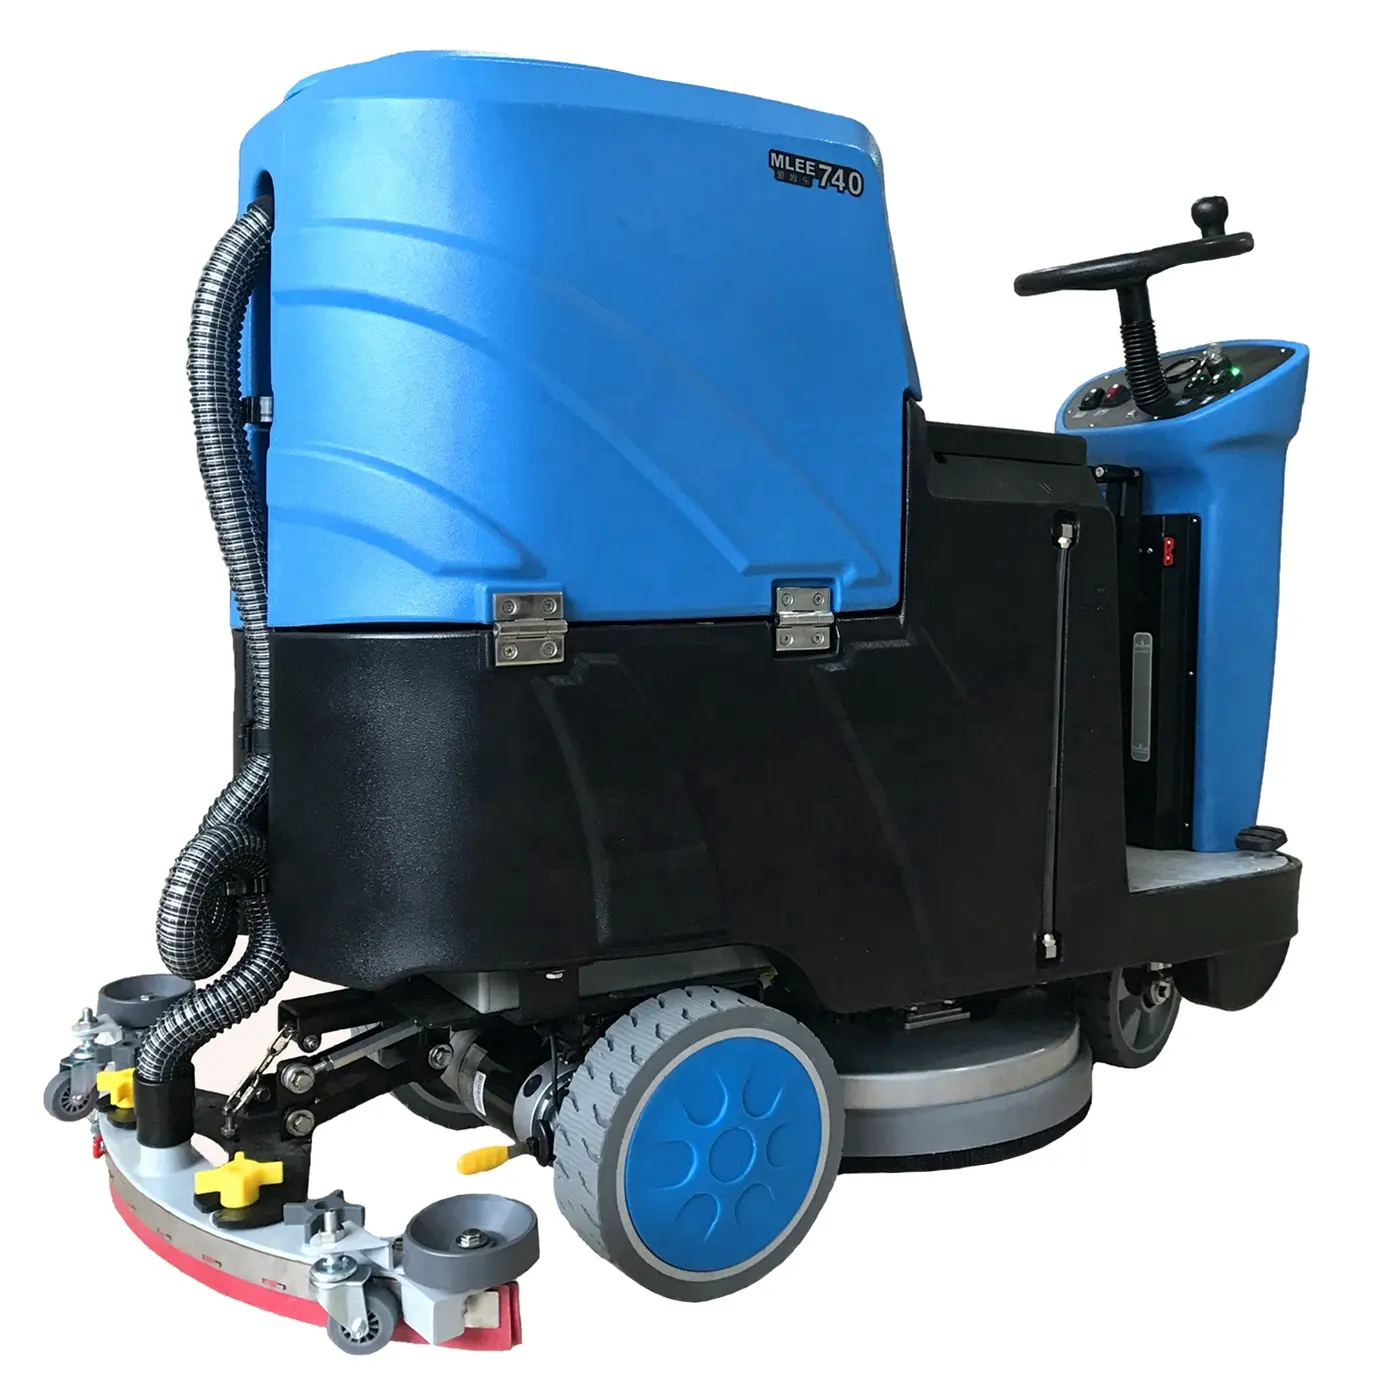 MLEE740AU Warehouse Flooring Cleaning Machine Hotel Airport Automatic Floor Scrubber